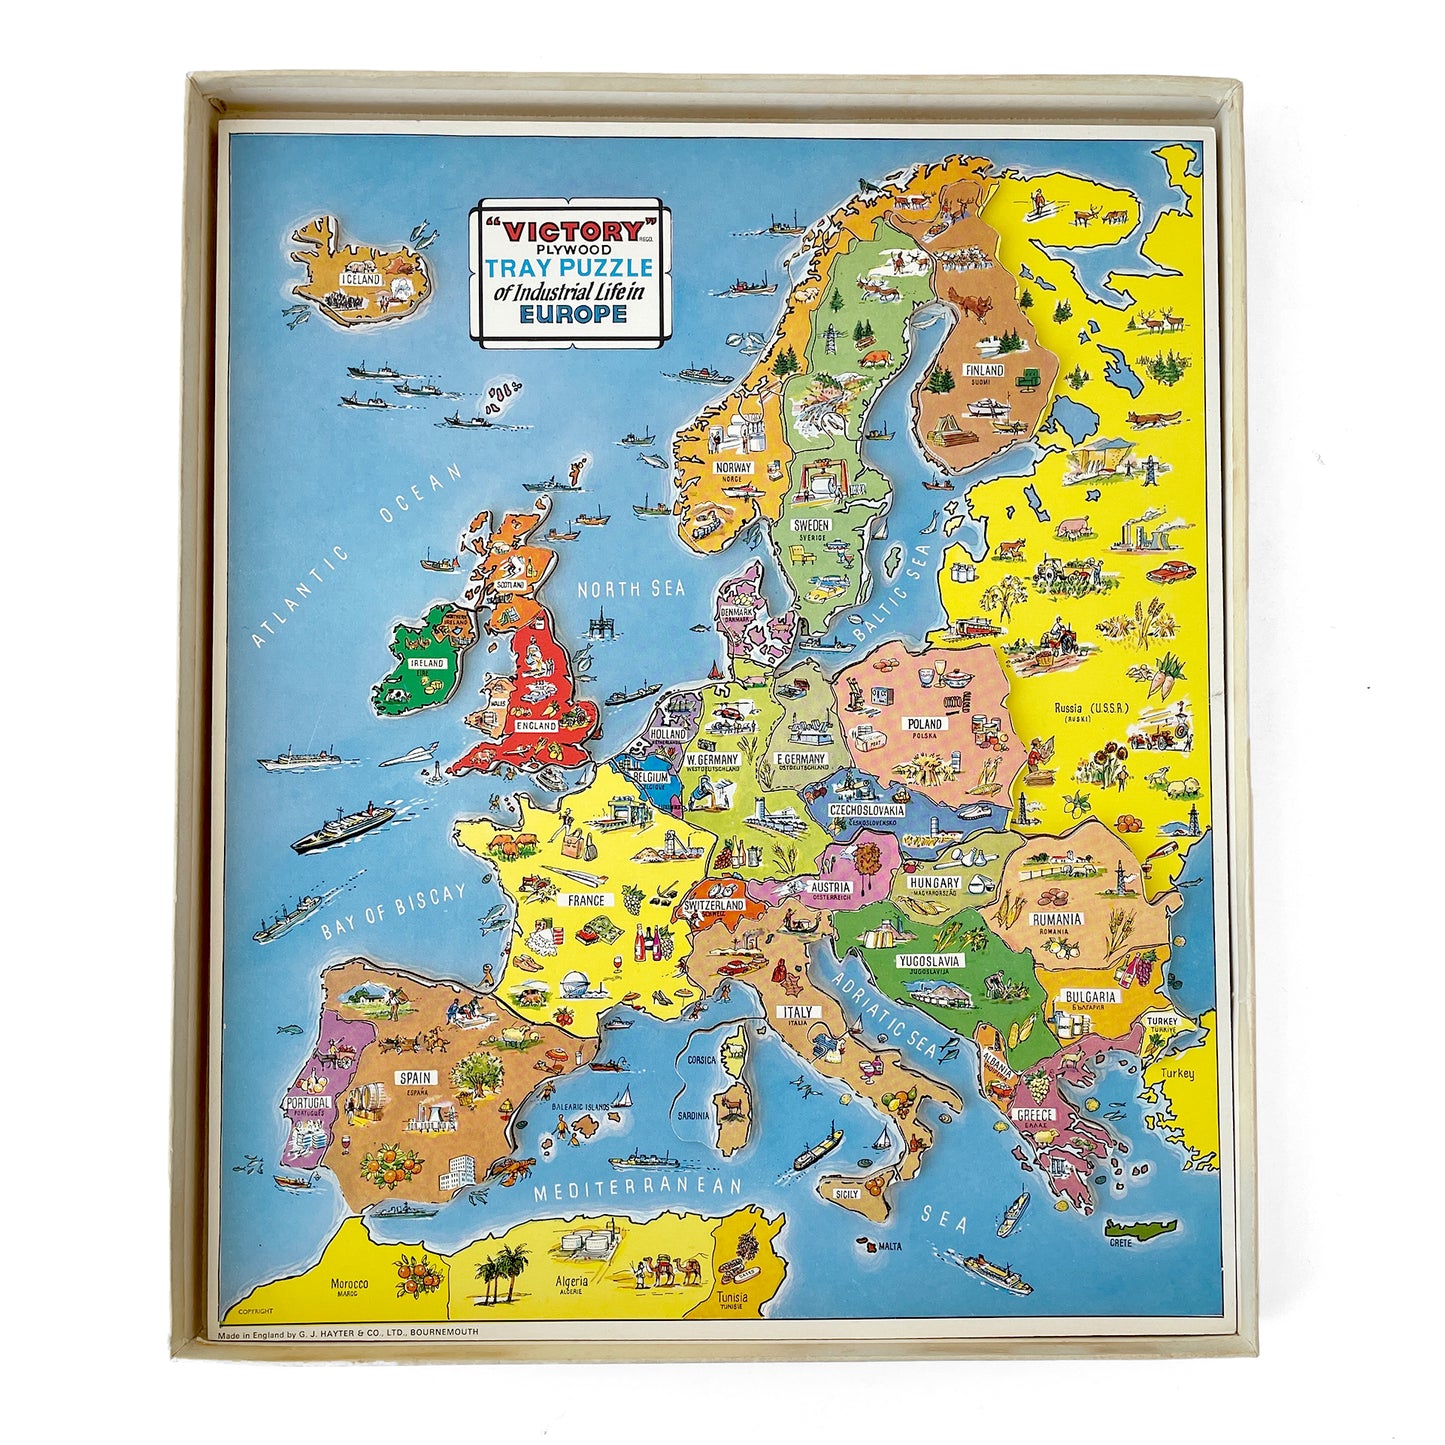 1970s ‘Victory’ Wooden Tray Puzzle/Jigsaw of Europe